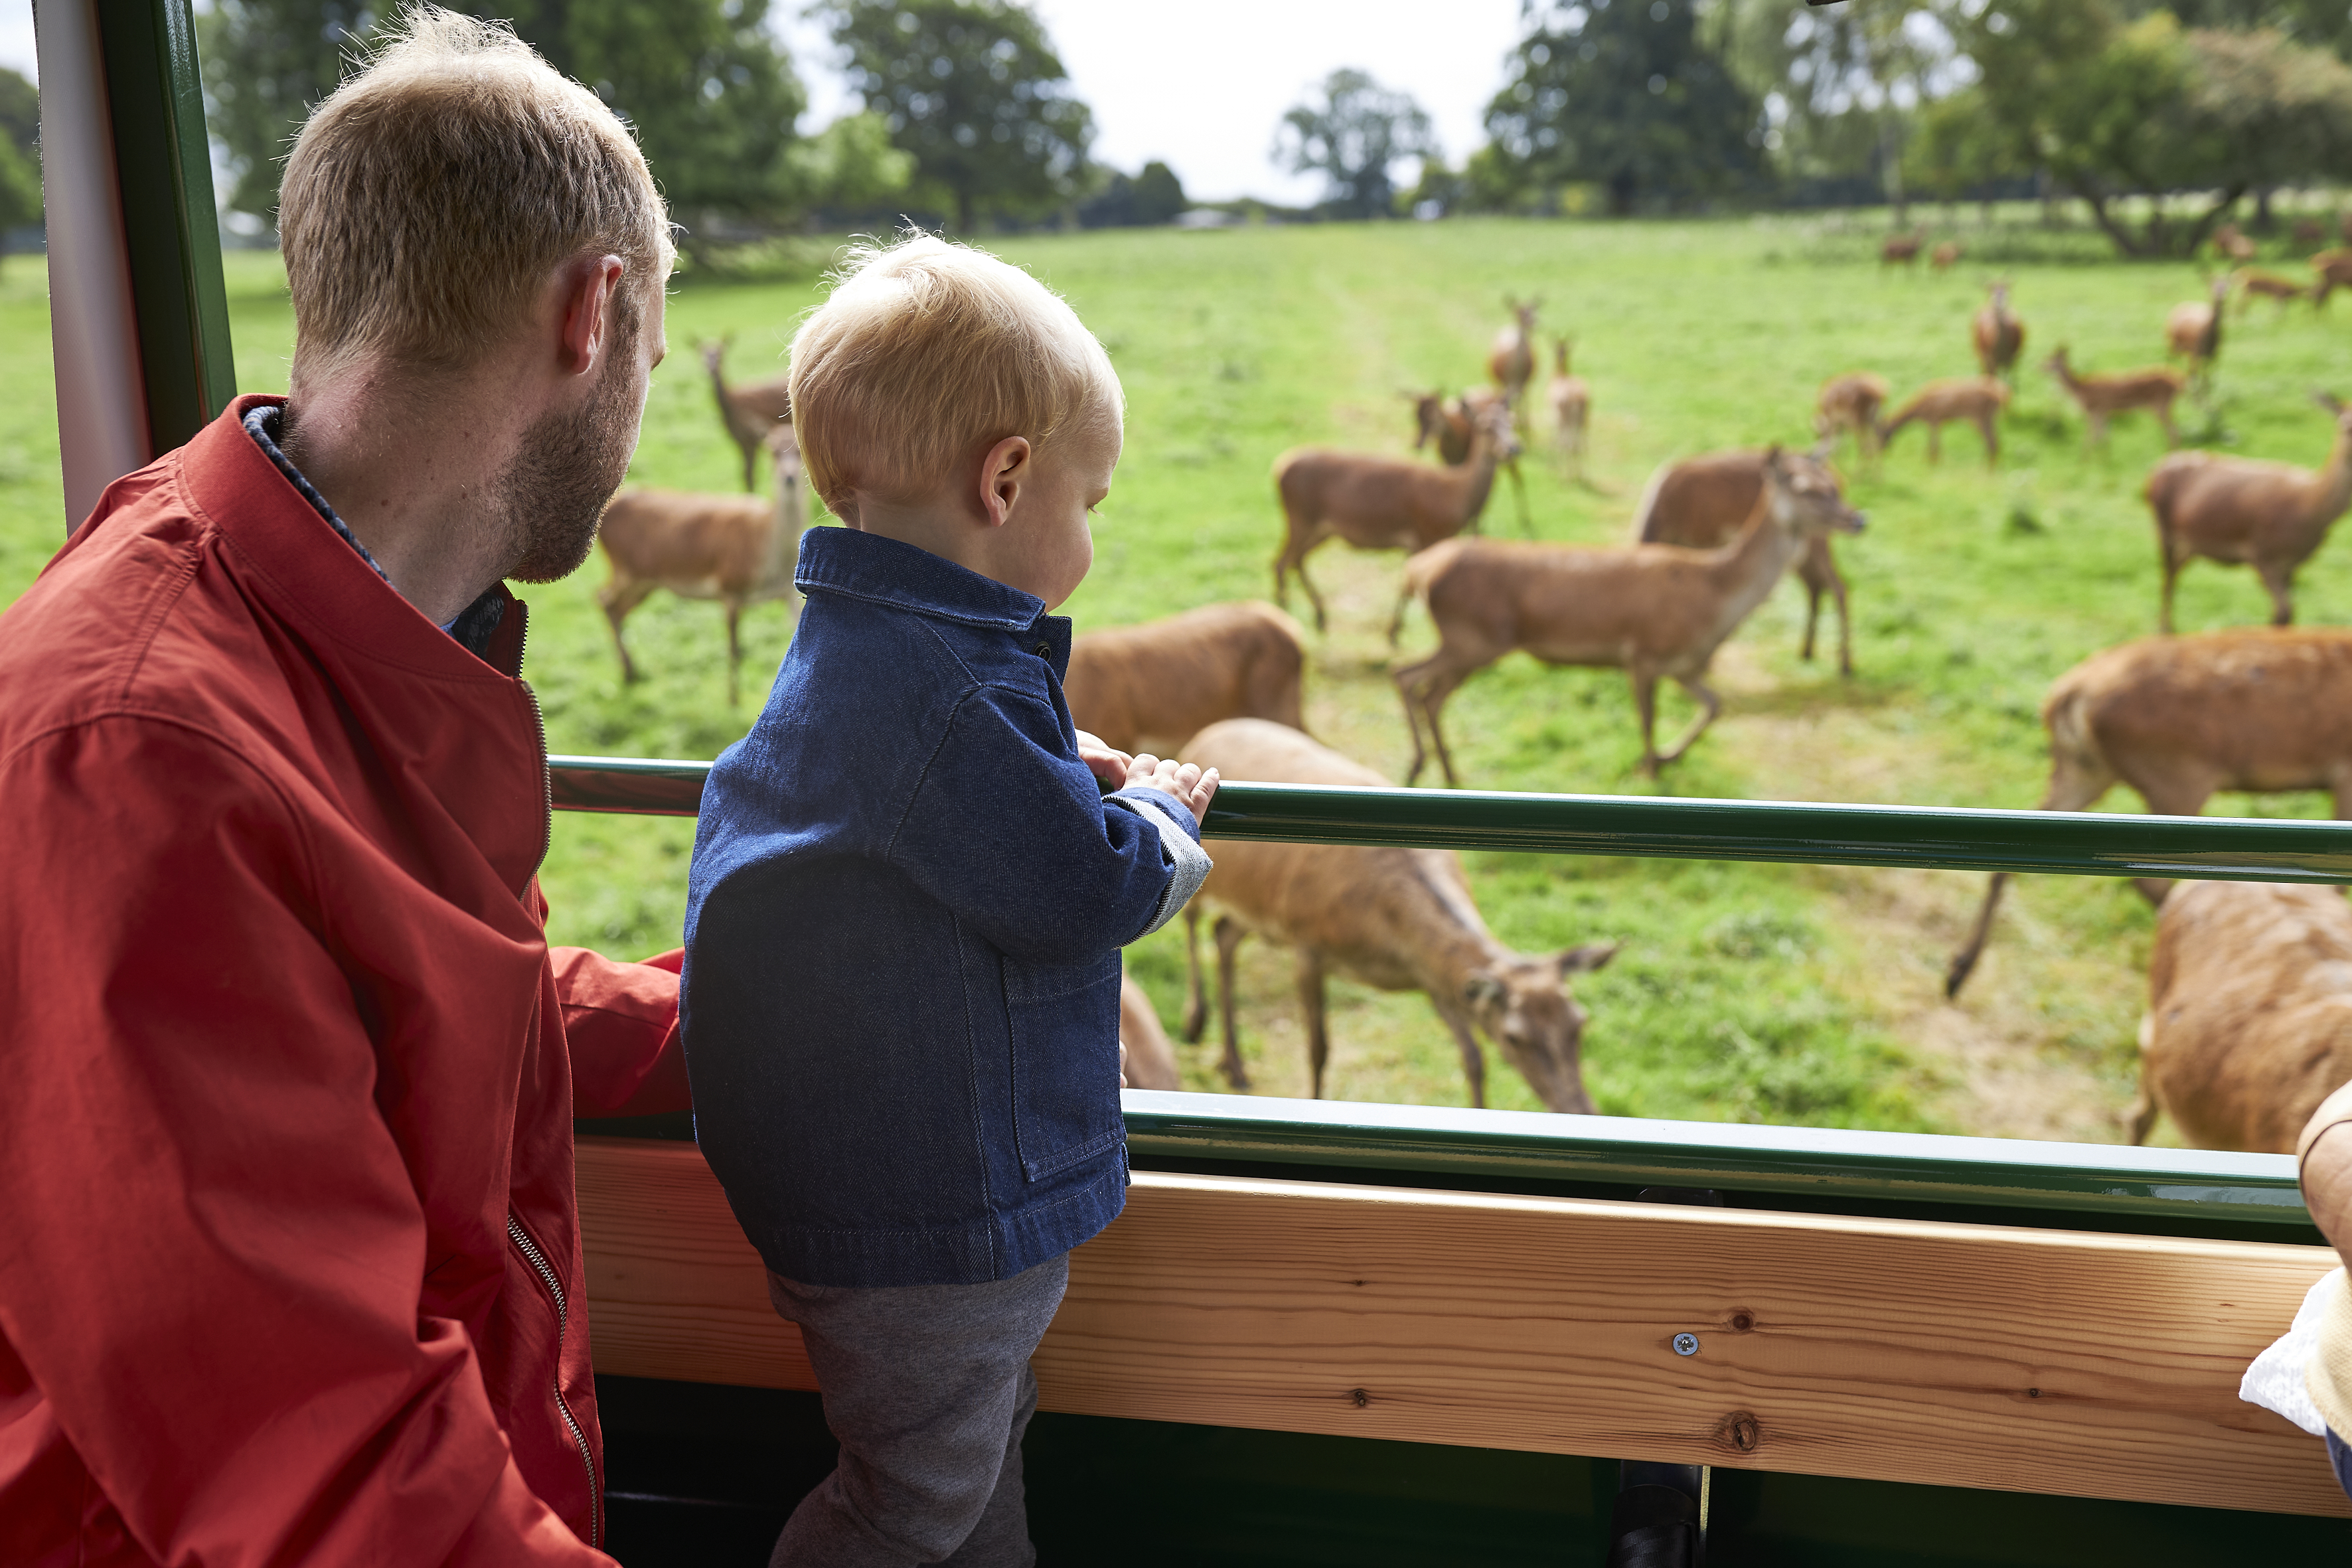 A man and child, both with fair hair wearing casual clothes, look out from a vehicle viewing point onto a field of deer.